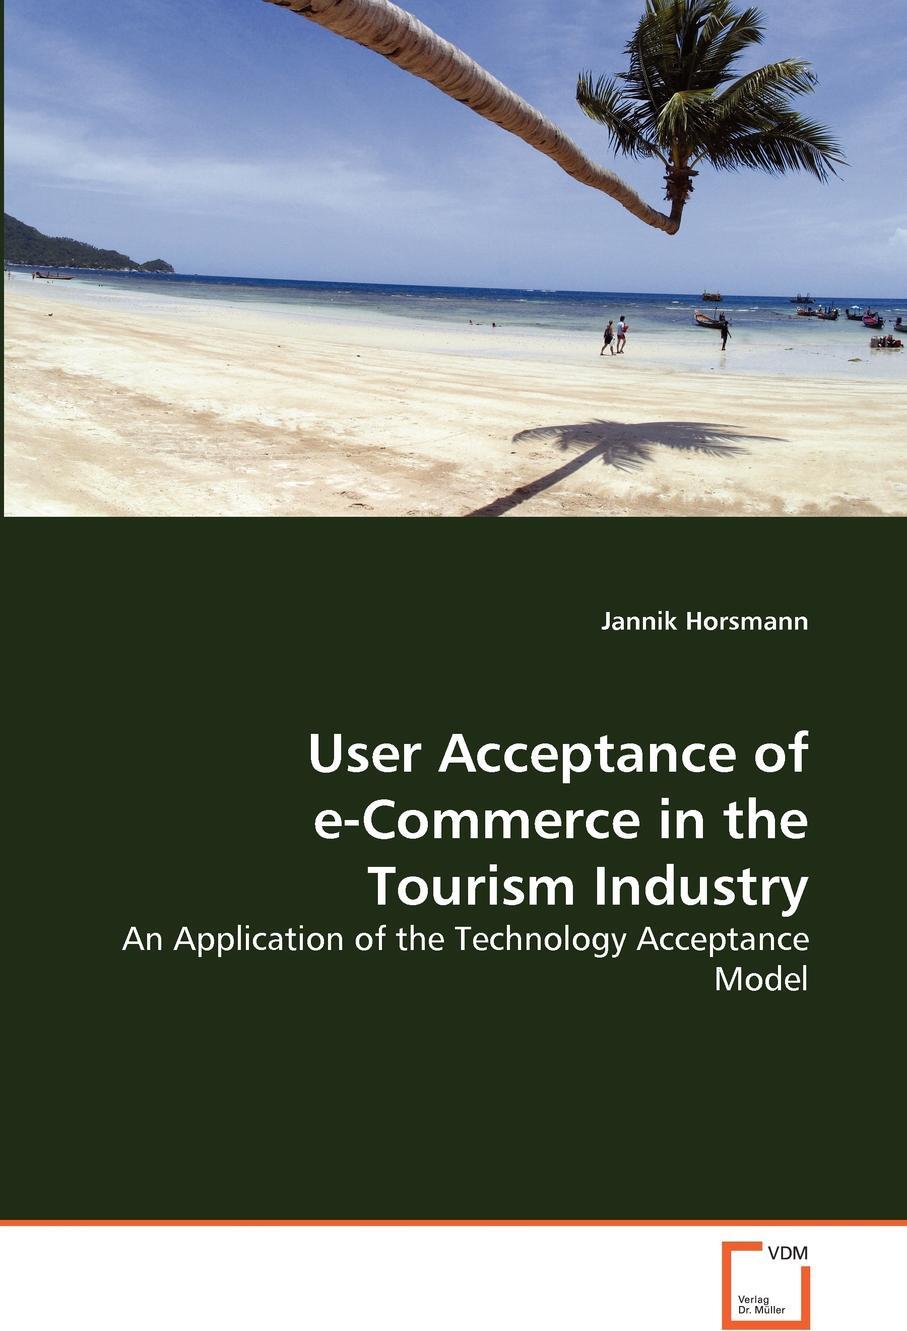 фото User Acceptance of e-Commerce in the Tourism Industry